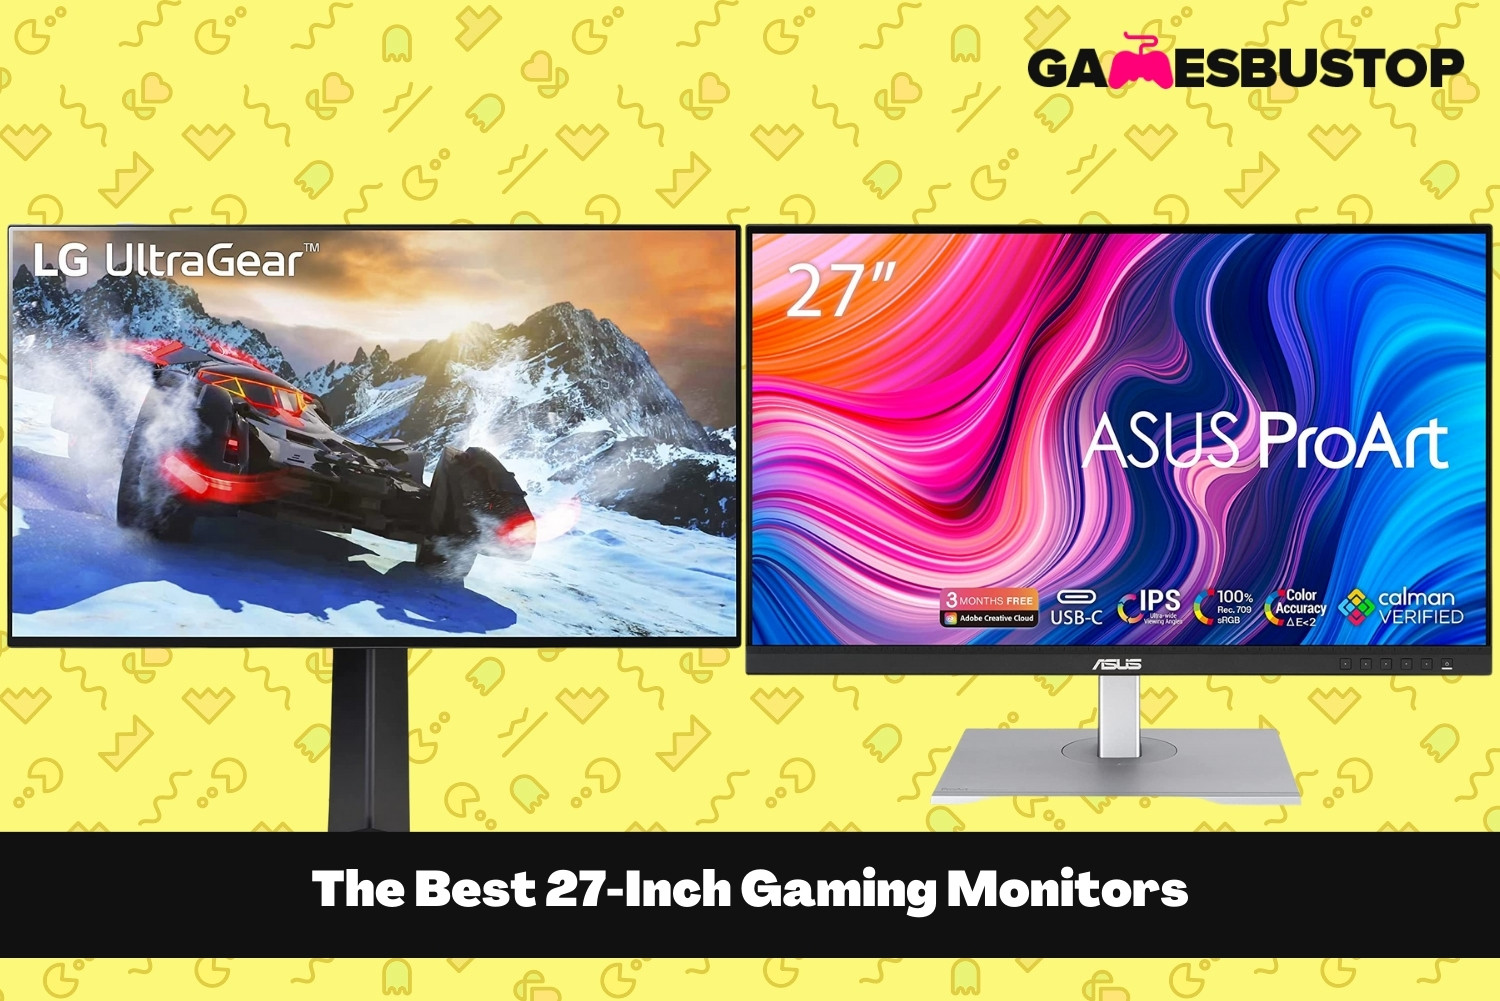 Best 27-inch Gaming Monitors